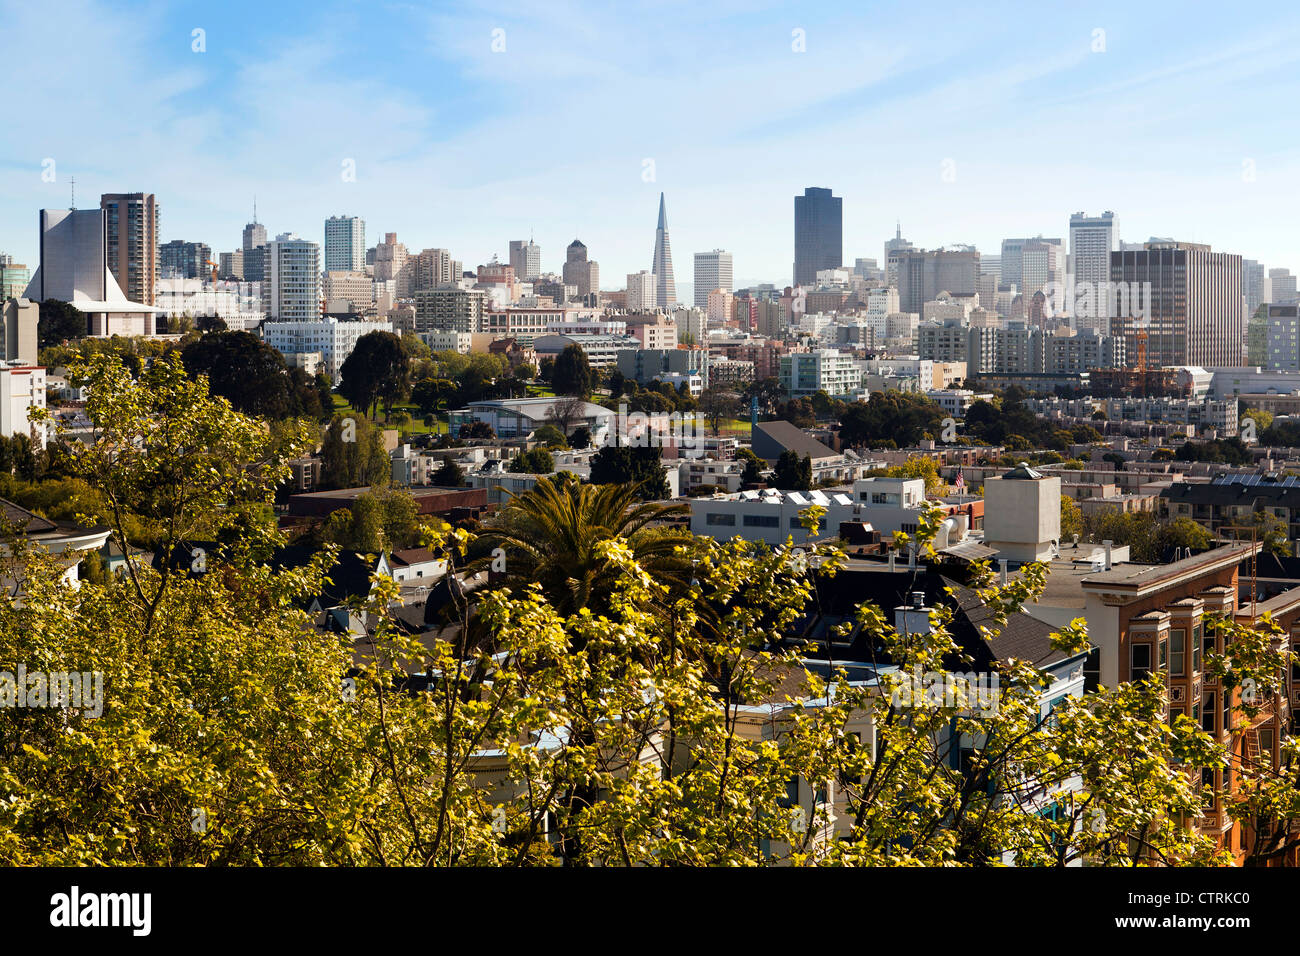 San Francisco skyline as seen from looking out of the top floor of one of the Painted Ladies of Alamo Square. Stock Photo